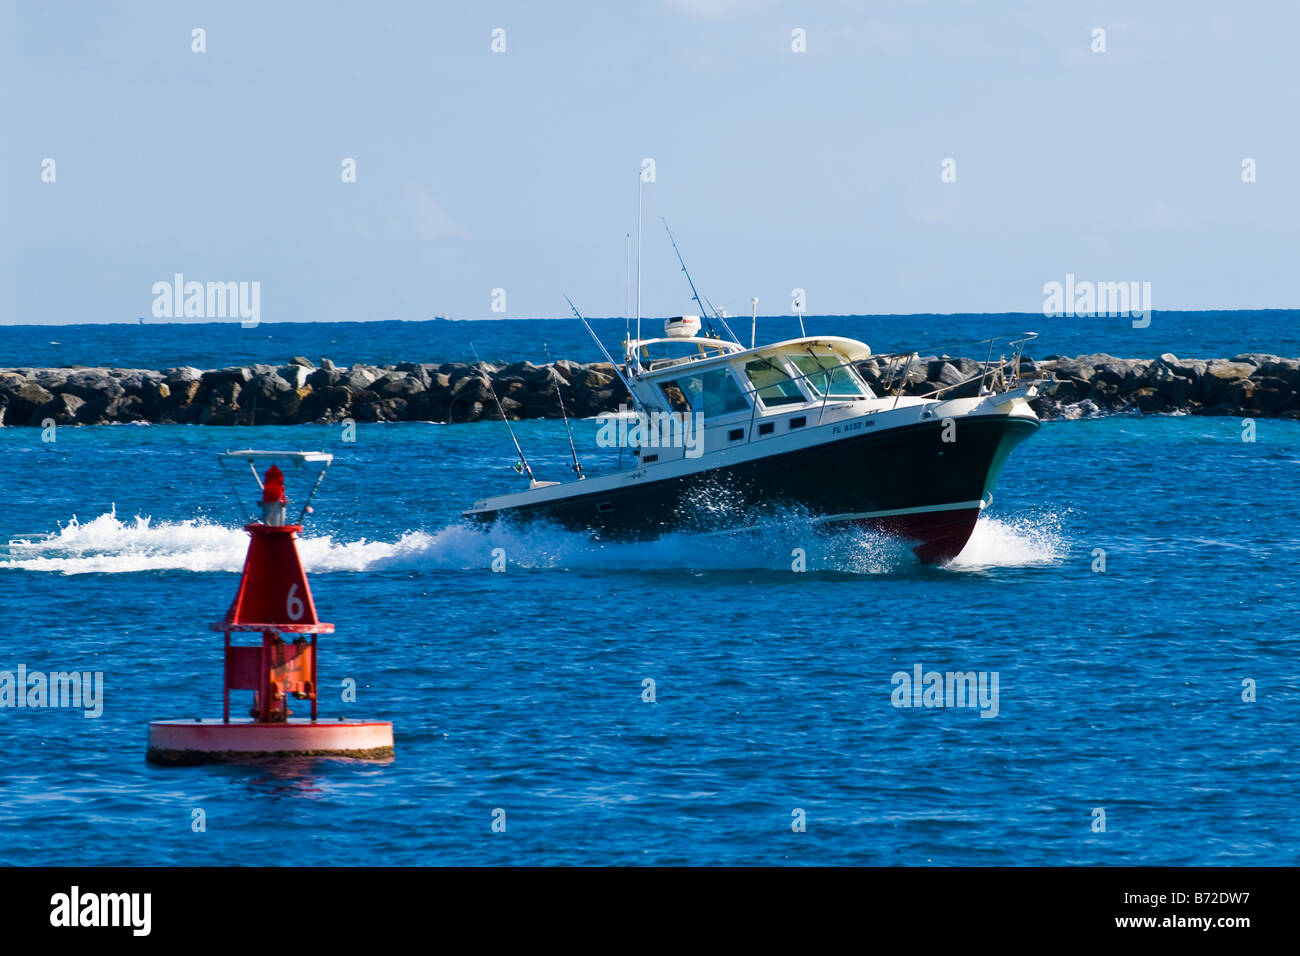 Palm Beach Shores , small private leisure game fishing speed motor boat returning from sea to marina background marker buoy deep blue sea & sky Stock Photo